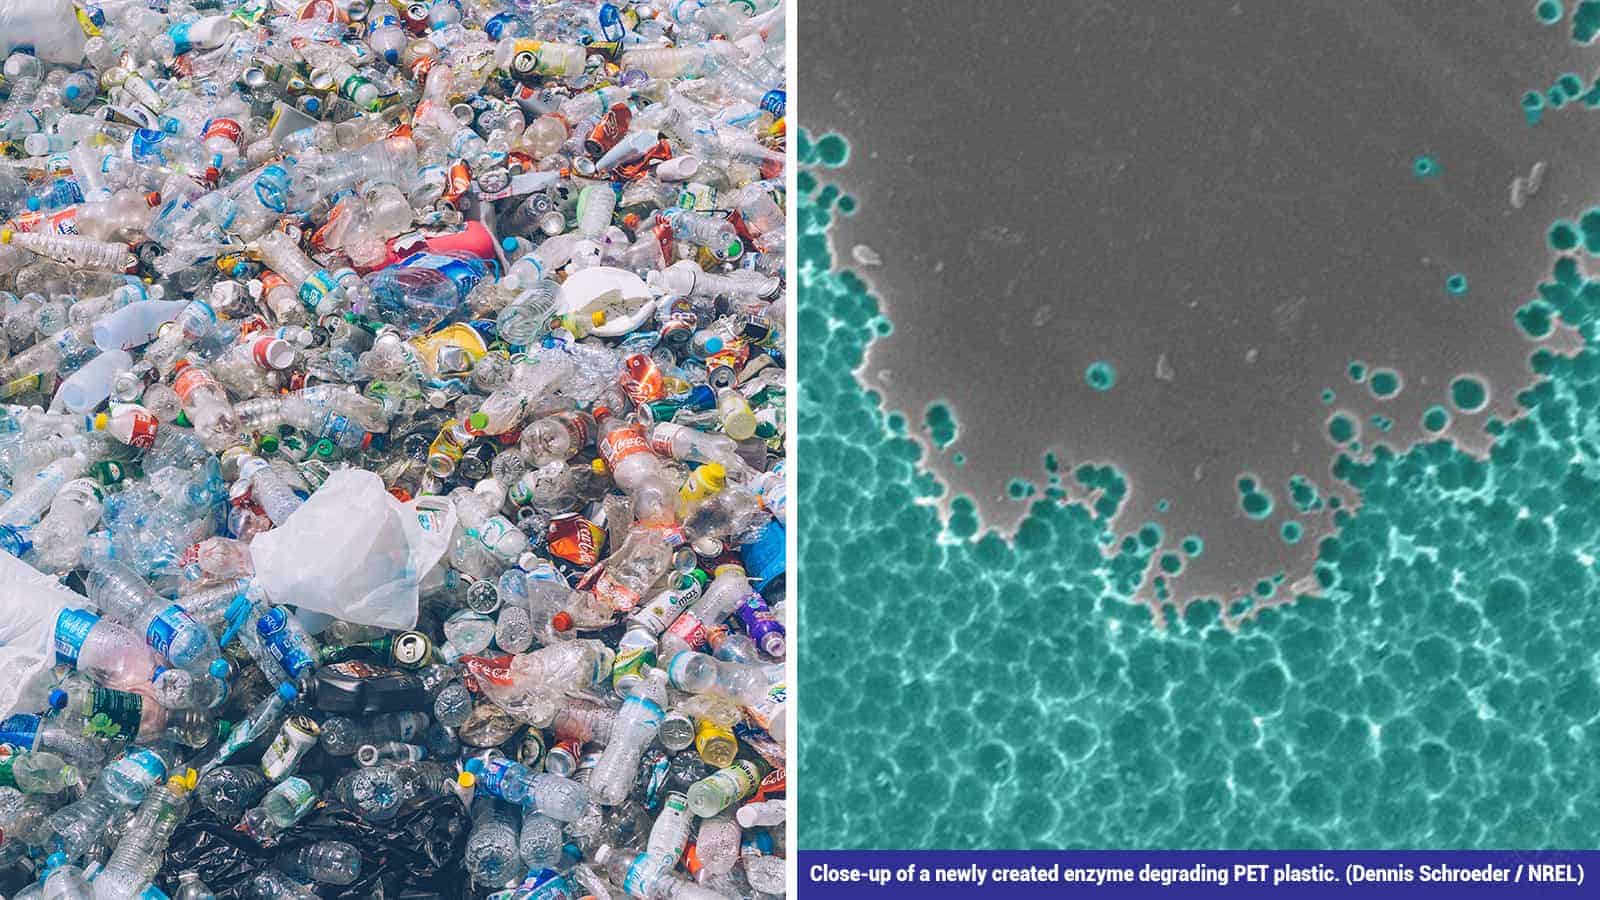 Researchers Make an Enzyme to Break Down Plastic in Just a Few Days